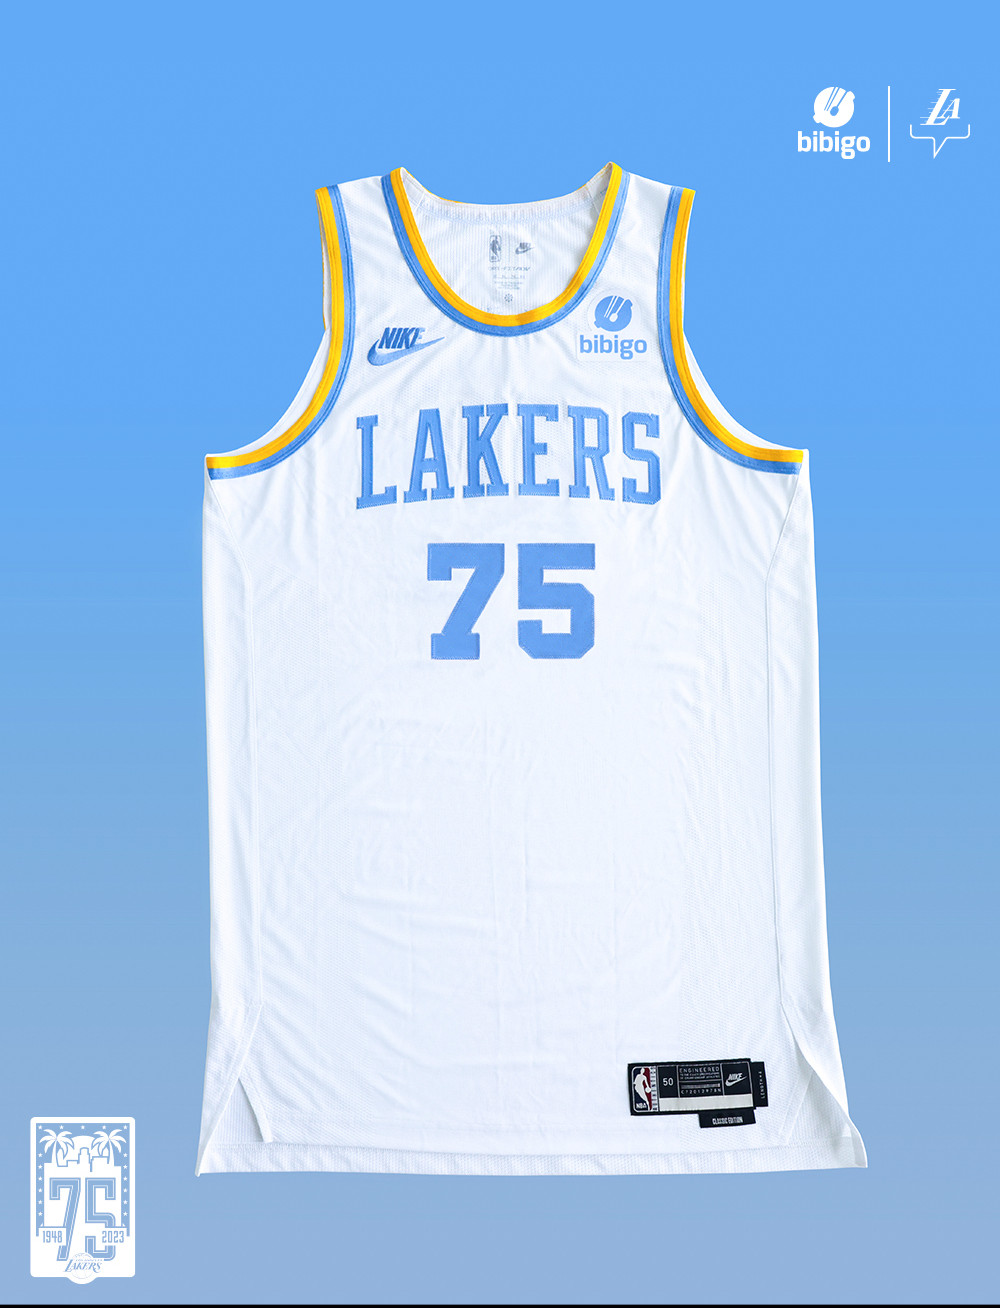 All Nike NBA 22-23 Classic Jerseys Leaked/Released